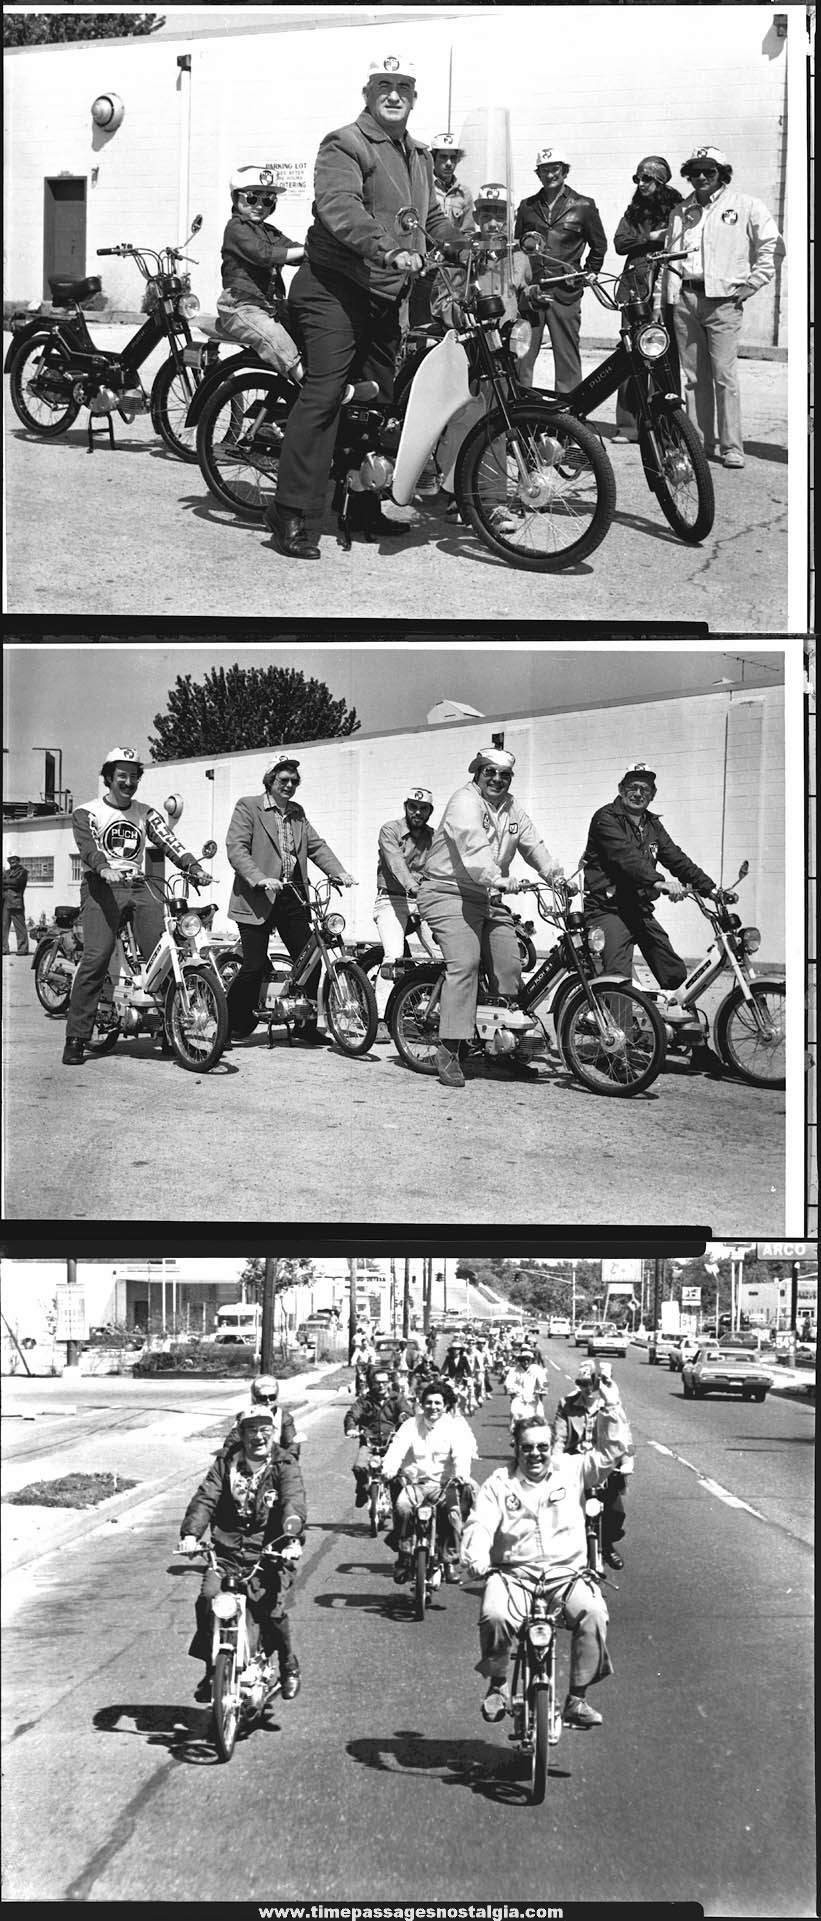 (3) 1976 Puch Mopeds with Riders Advertising Group or Club Photograph Negatives